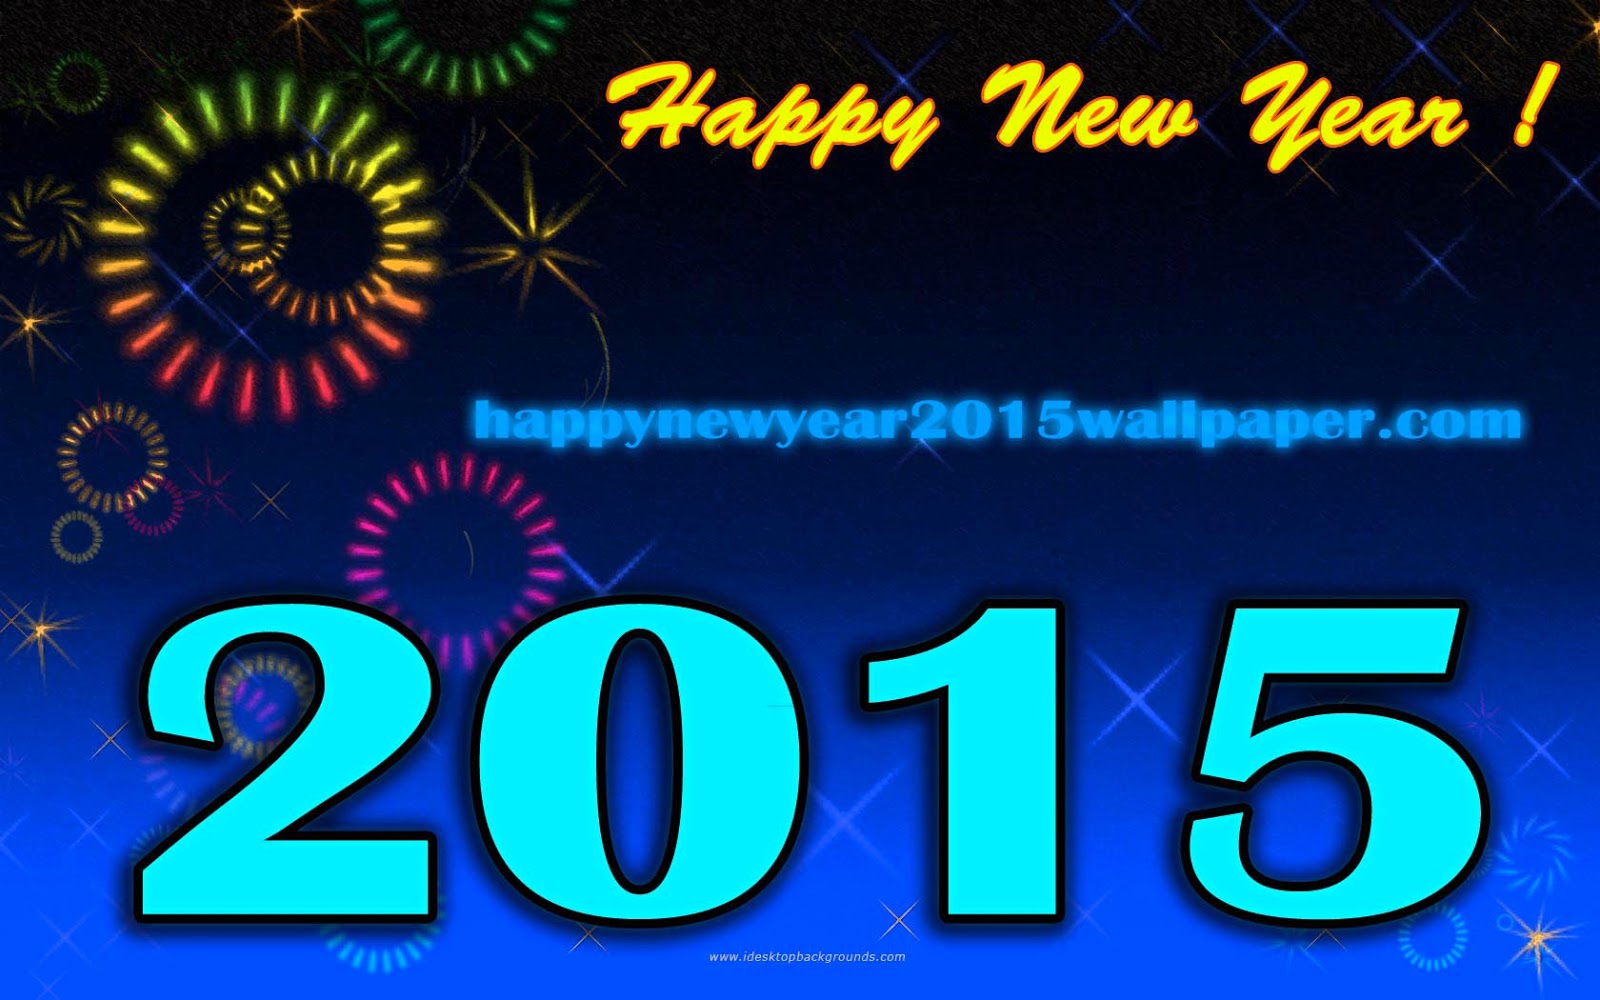 happy new year 2015 wallpaper for greetings Use these 2015 happy new 1600x1000